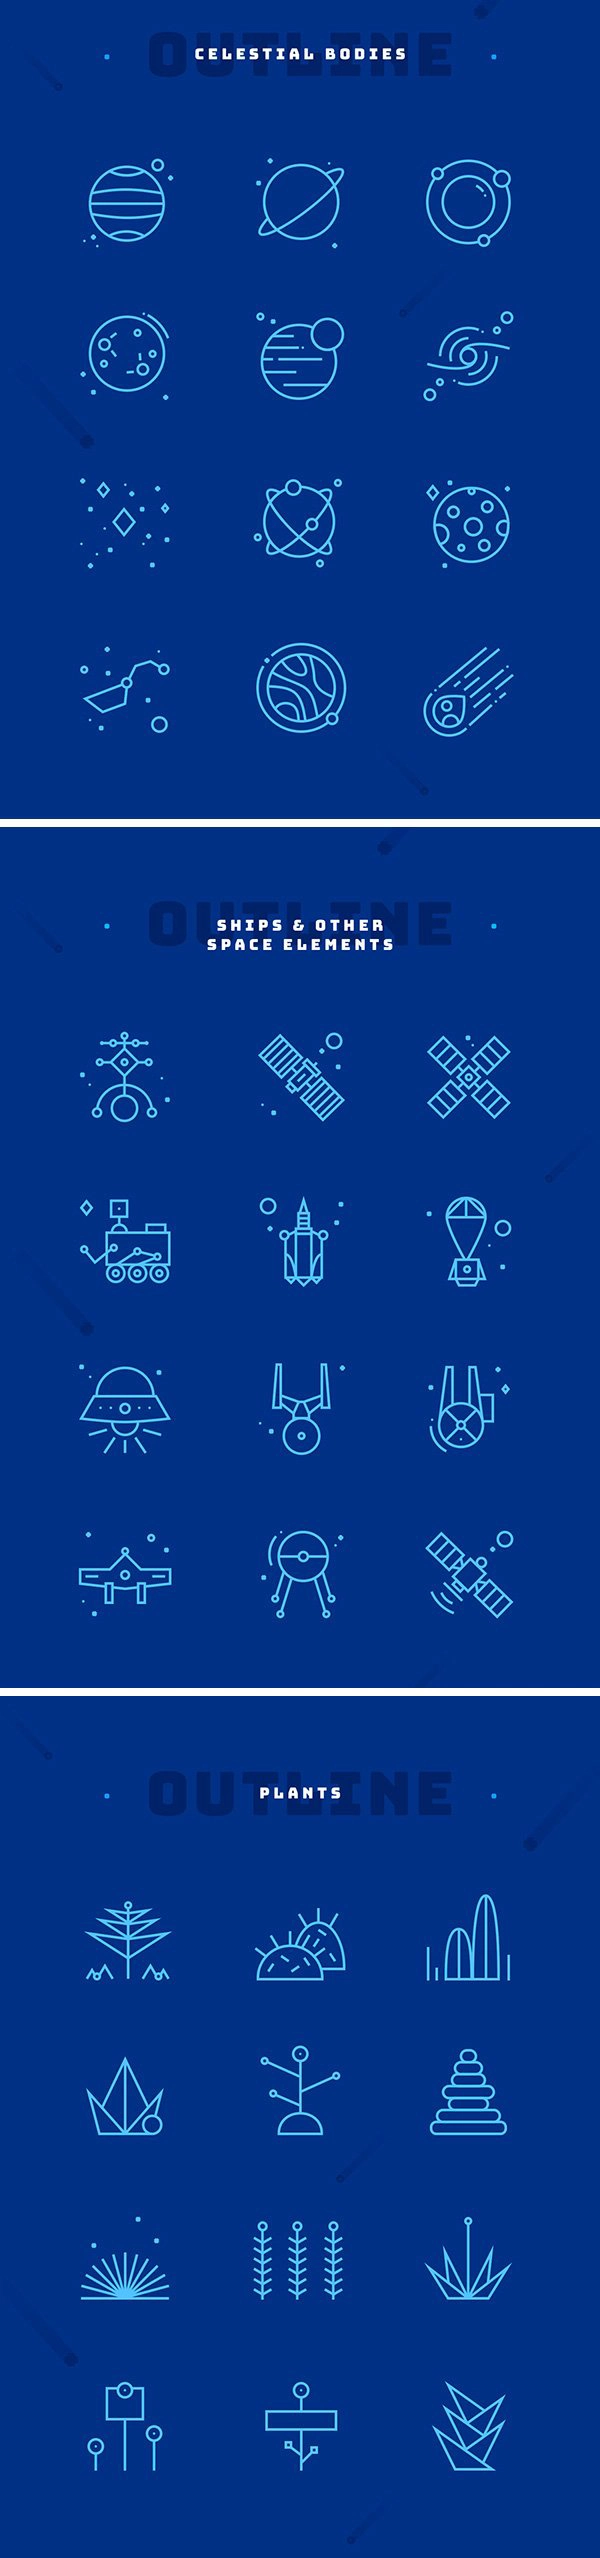 Space Iconography: 36 Free Icons